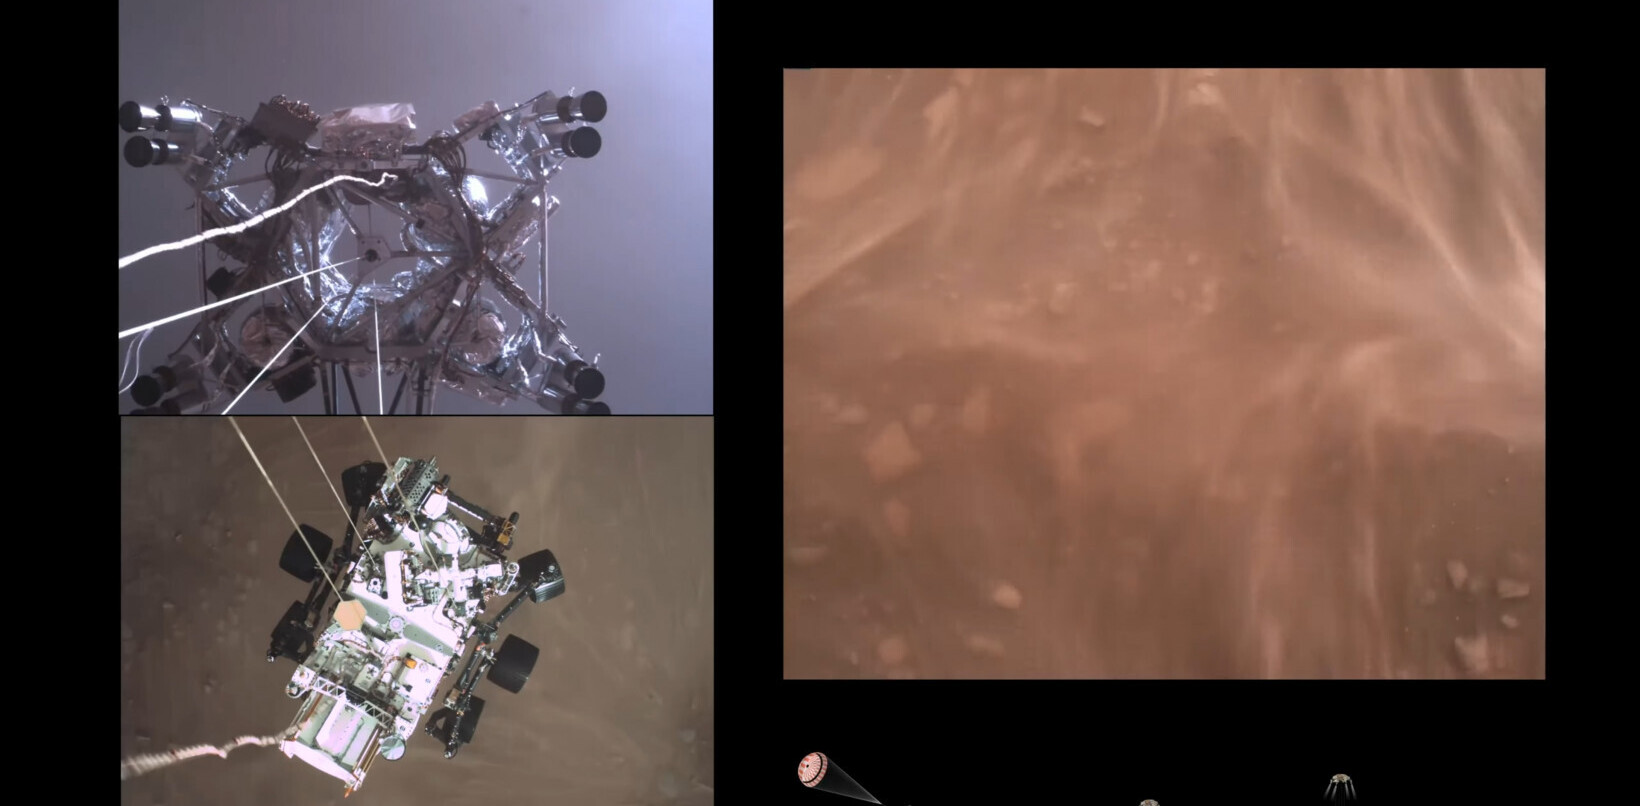 Watch: Amazing NASA footage shows Perseverance rover setting down on Mars